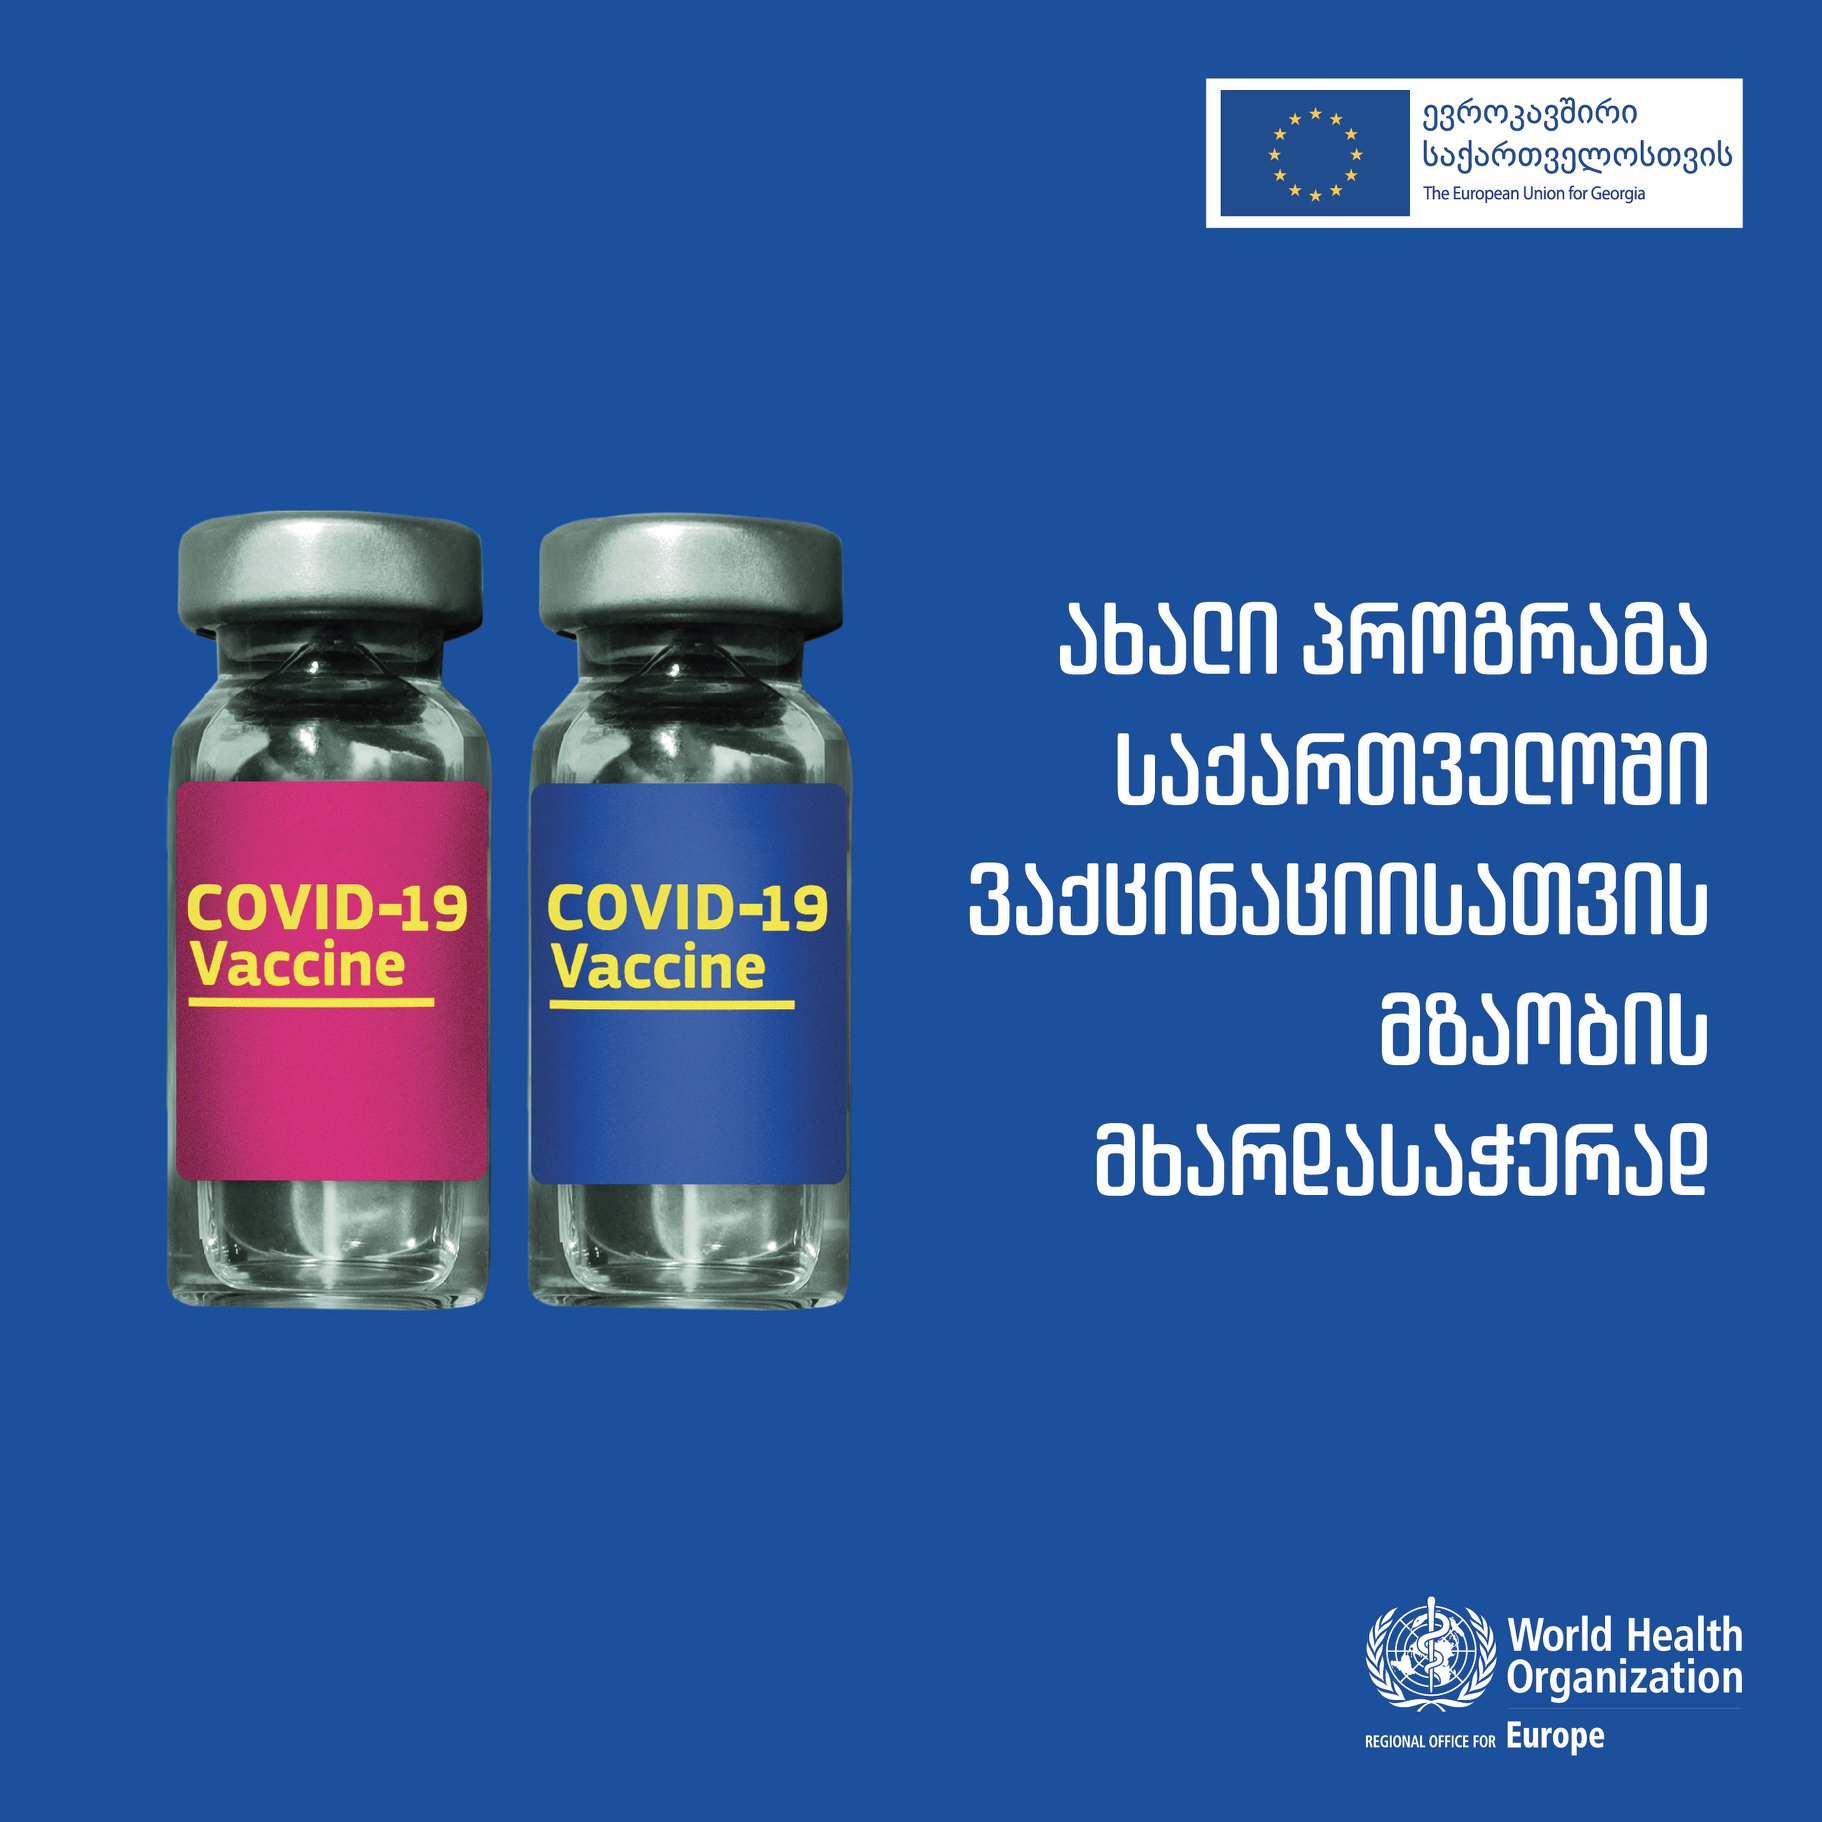 EU and WHO join forces to support vaccination against COVID-19 in Georgia